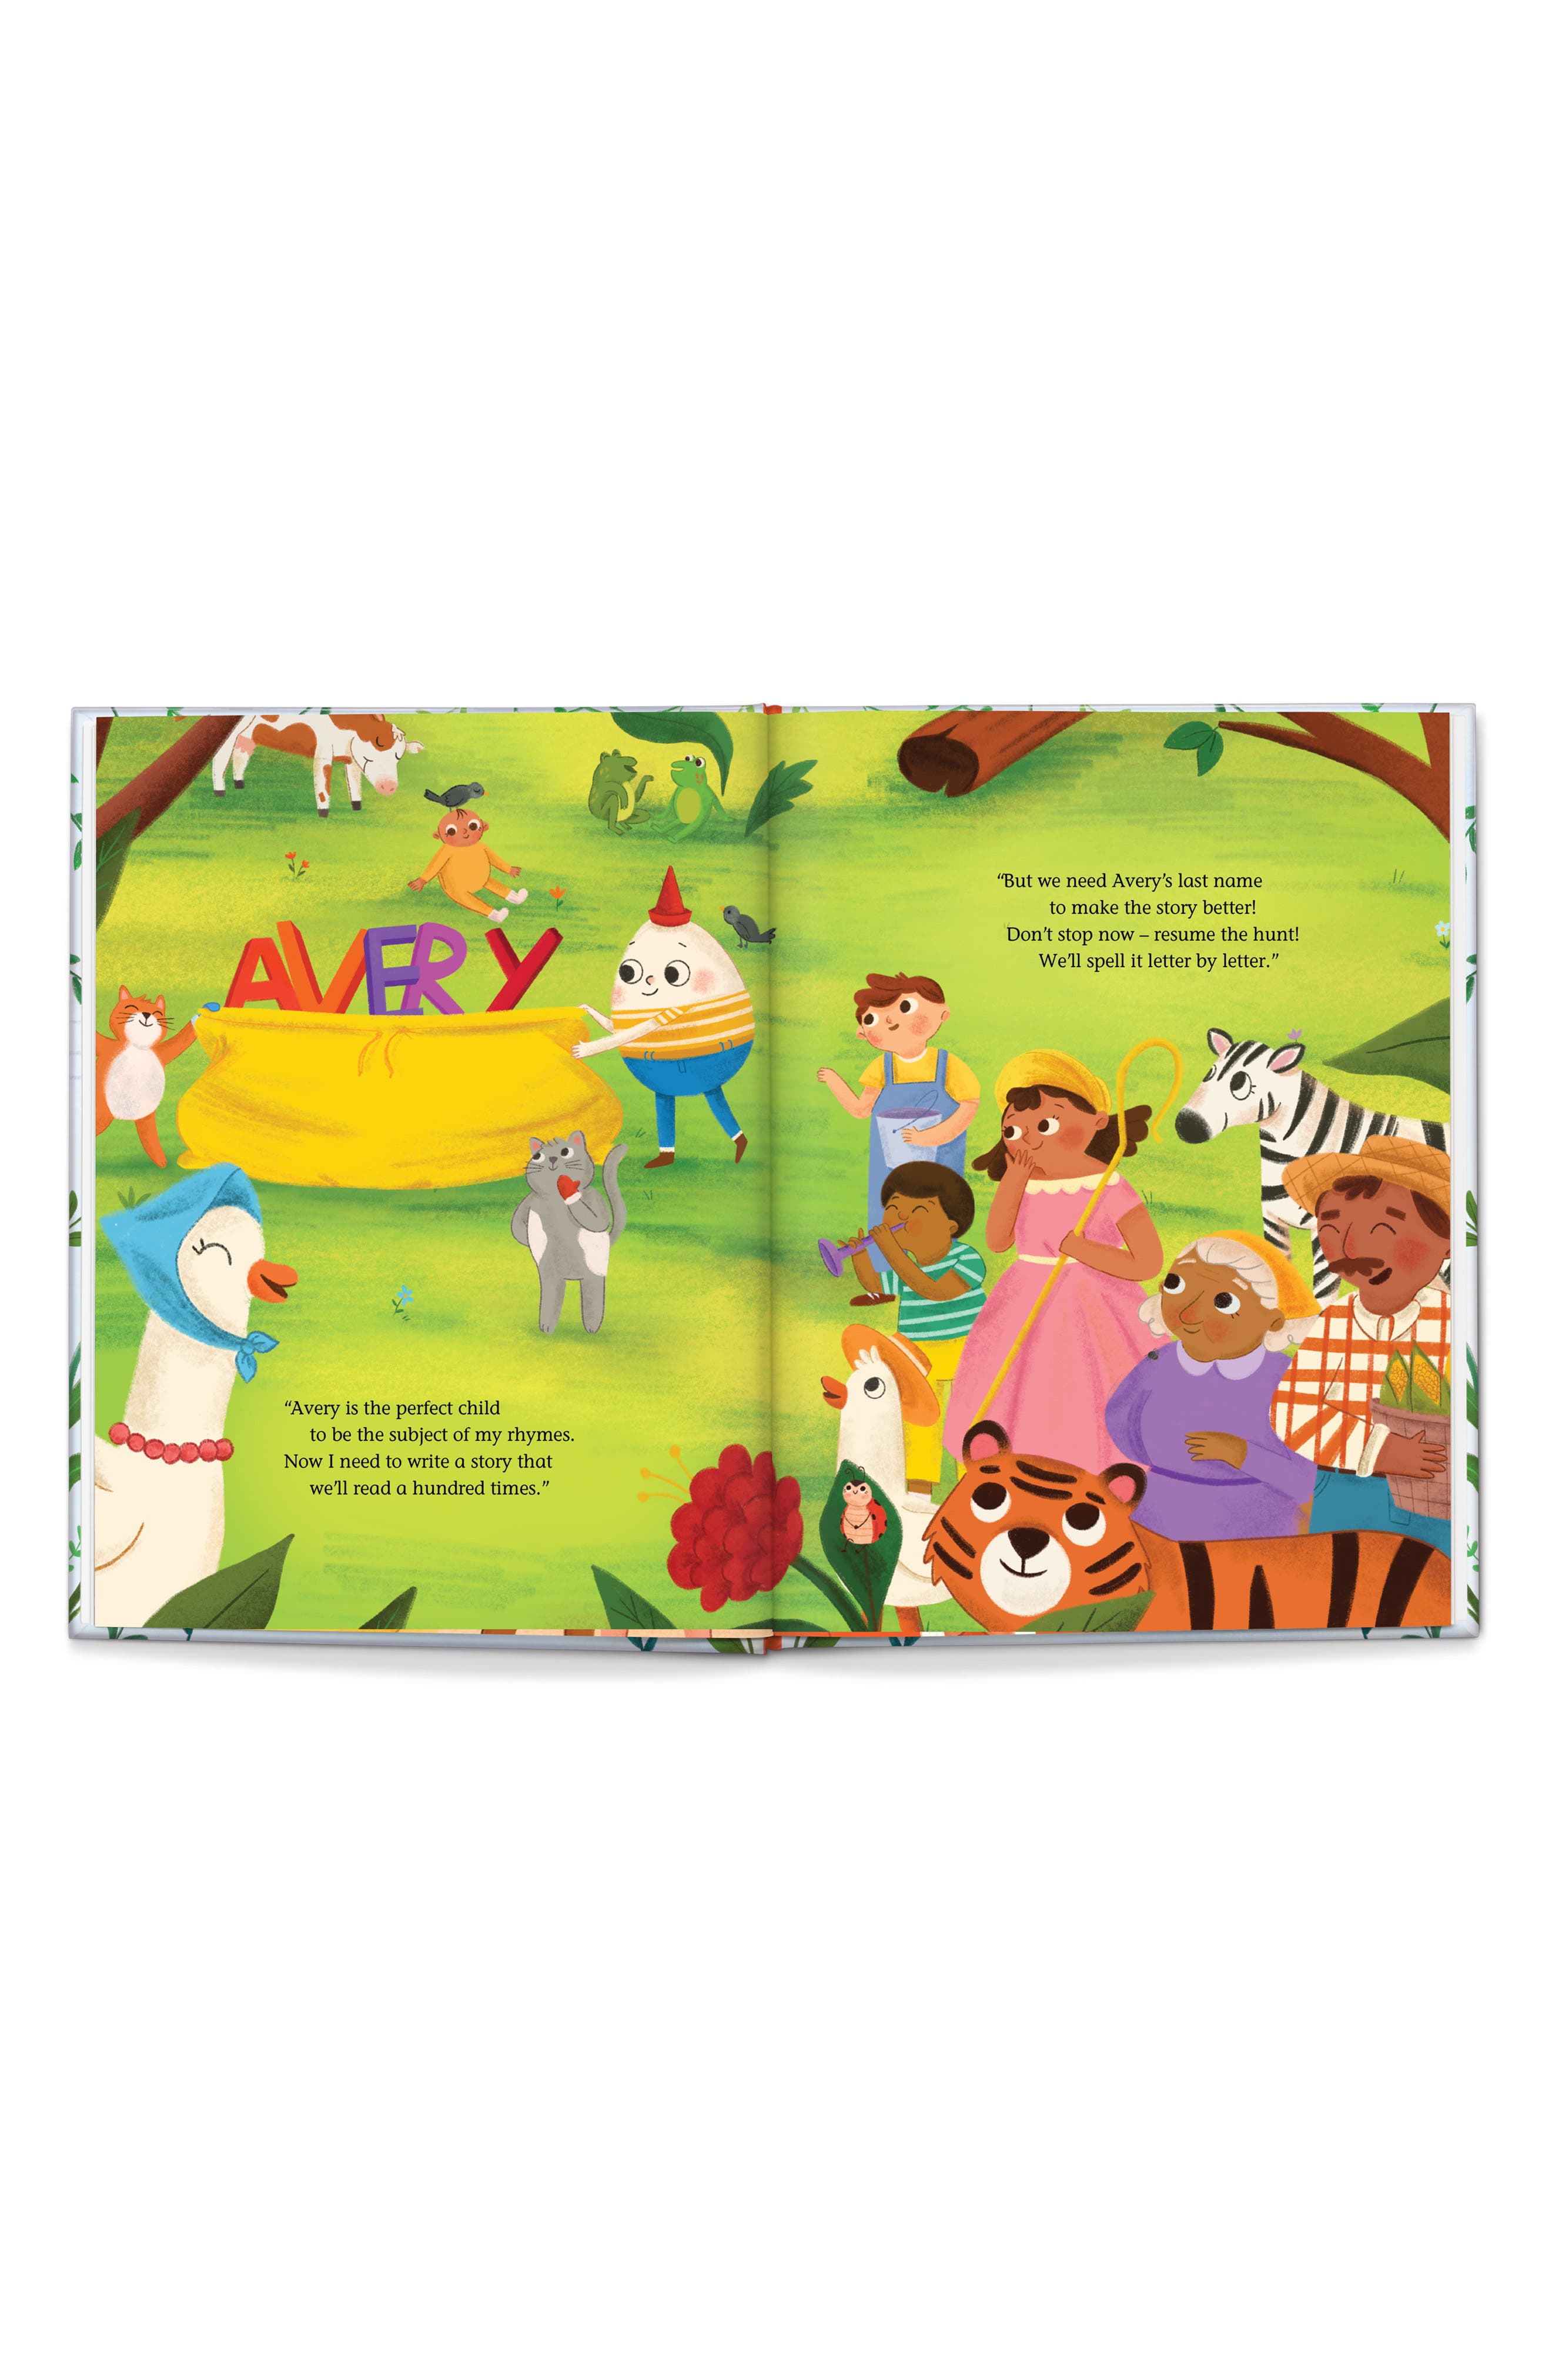 My Very Own Nursery Rhymes Personalized Book I See Me HARDCOVER 